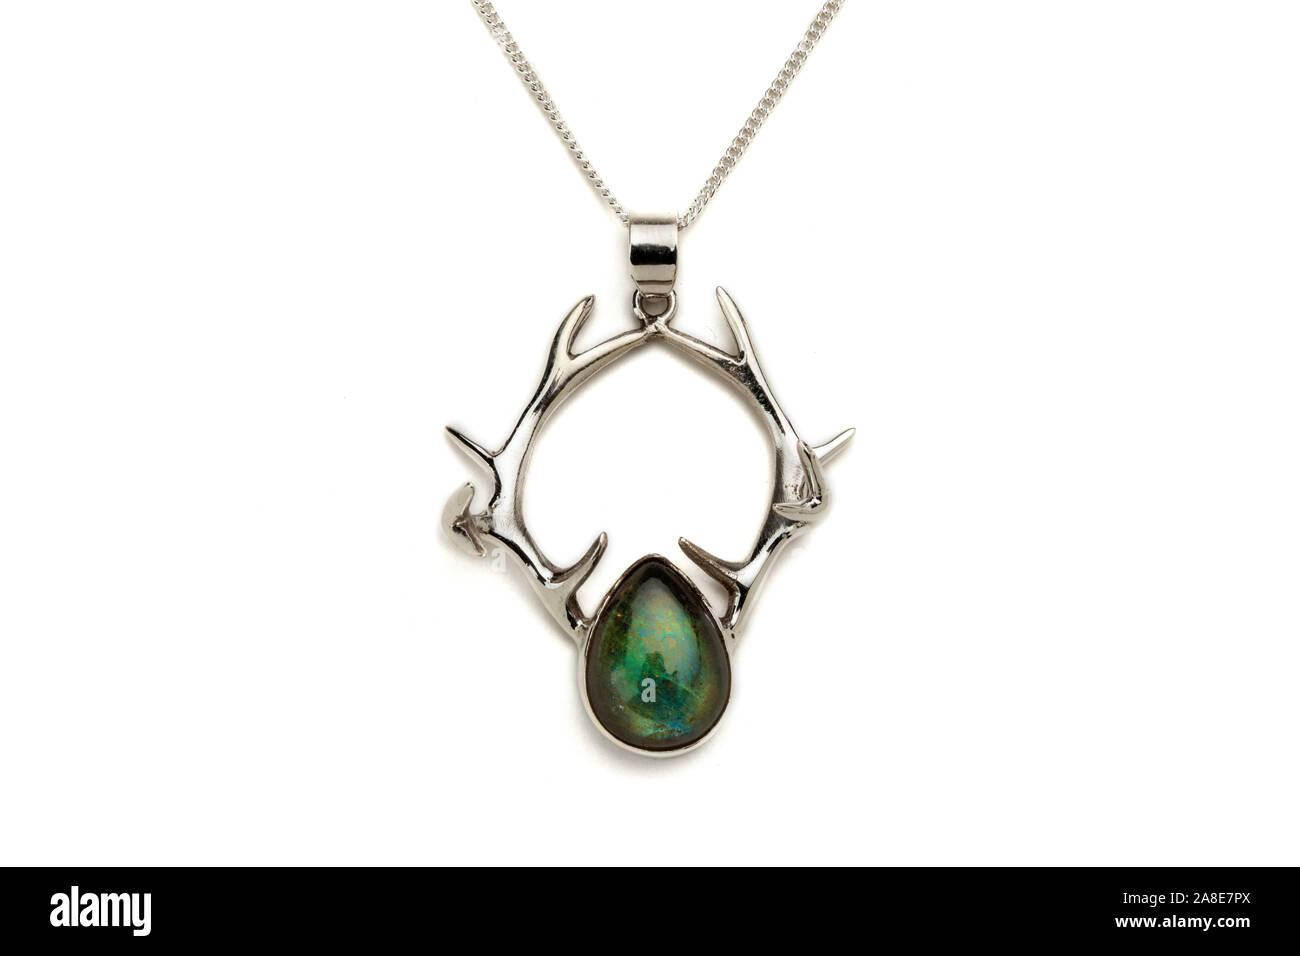 Silver stag antlers and labradorite necklace pendant Stock Photo